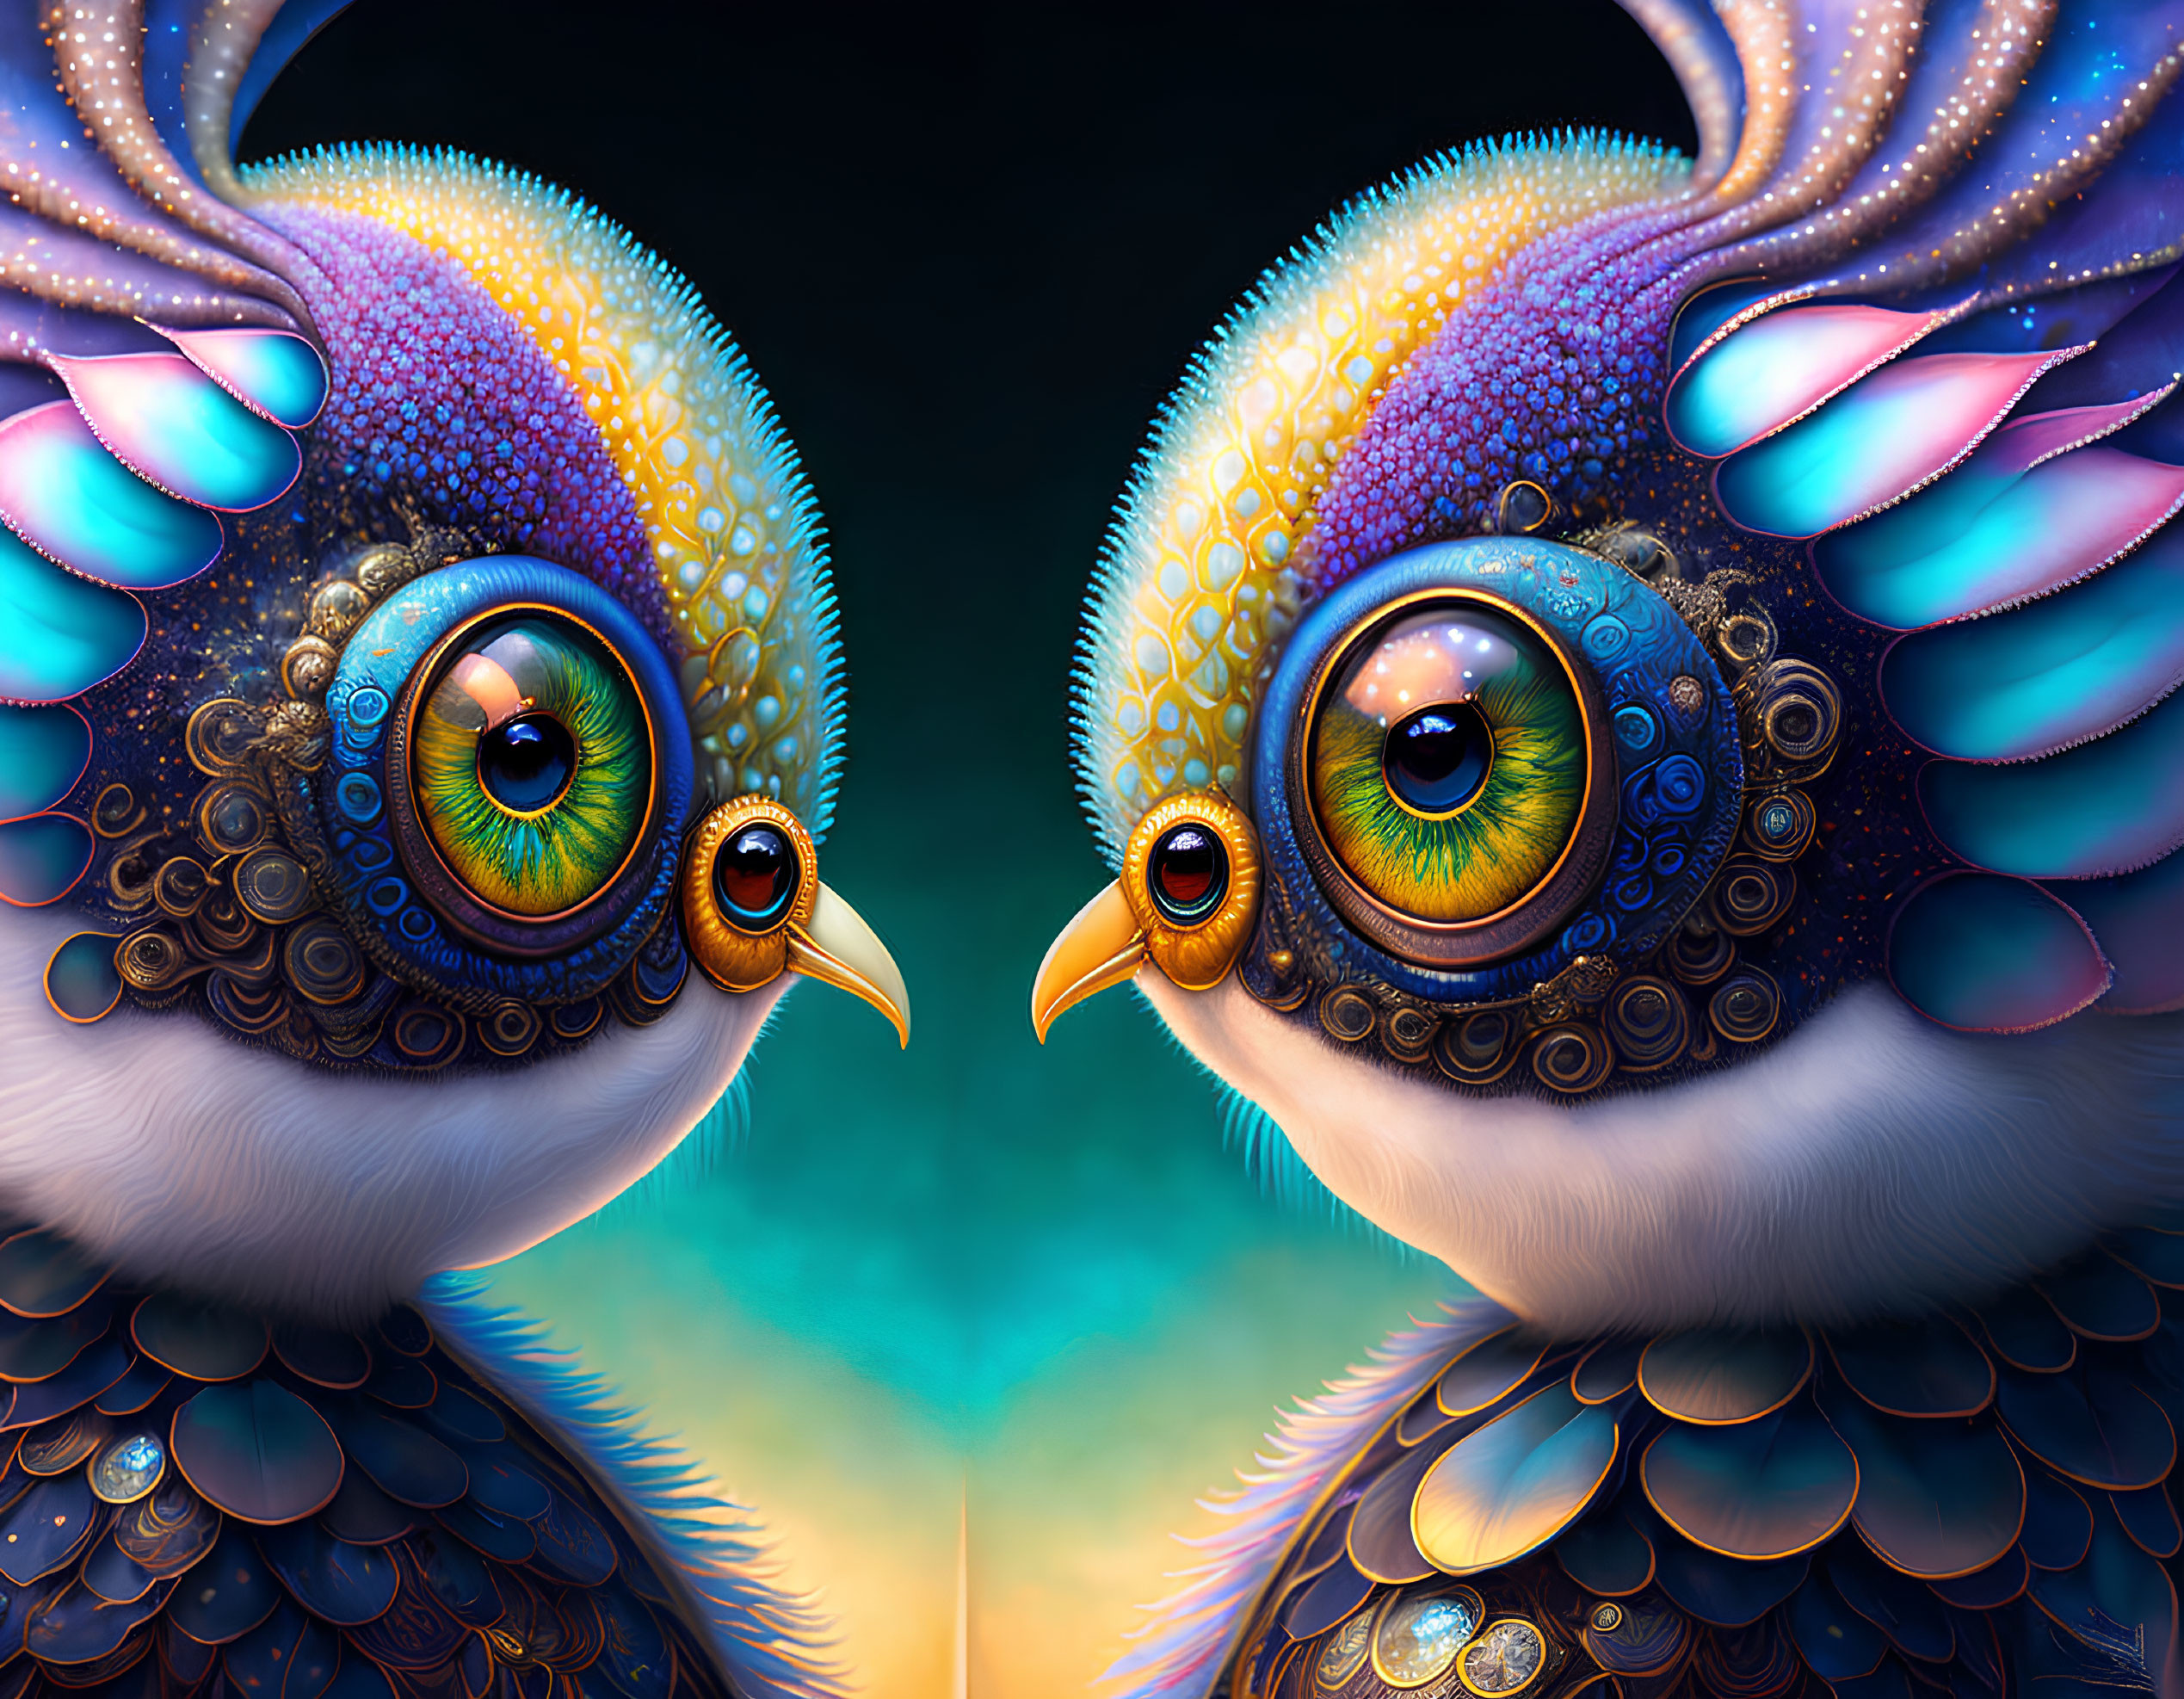 Vibrant bird-like creatures with intricate feathers and expressive eyes.